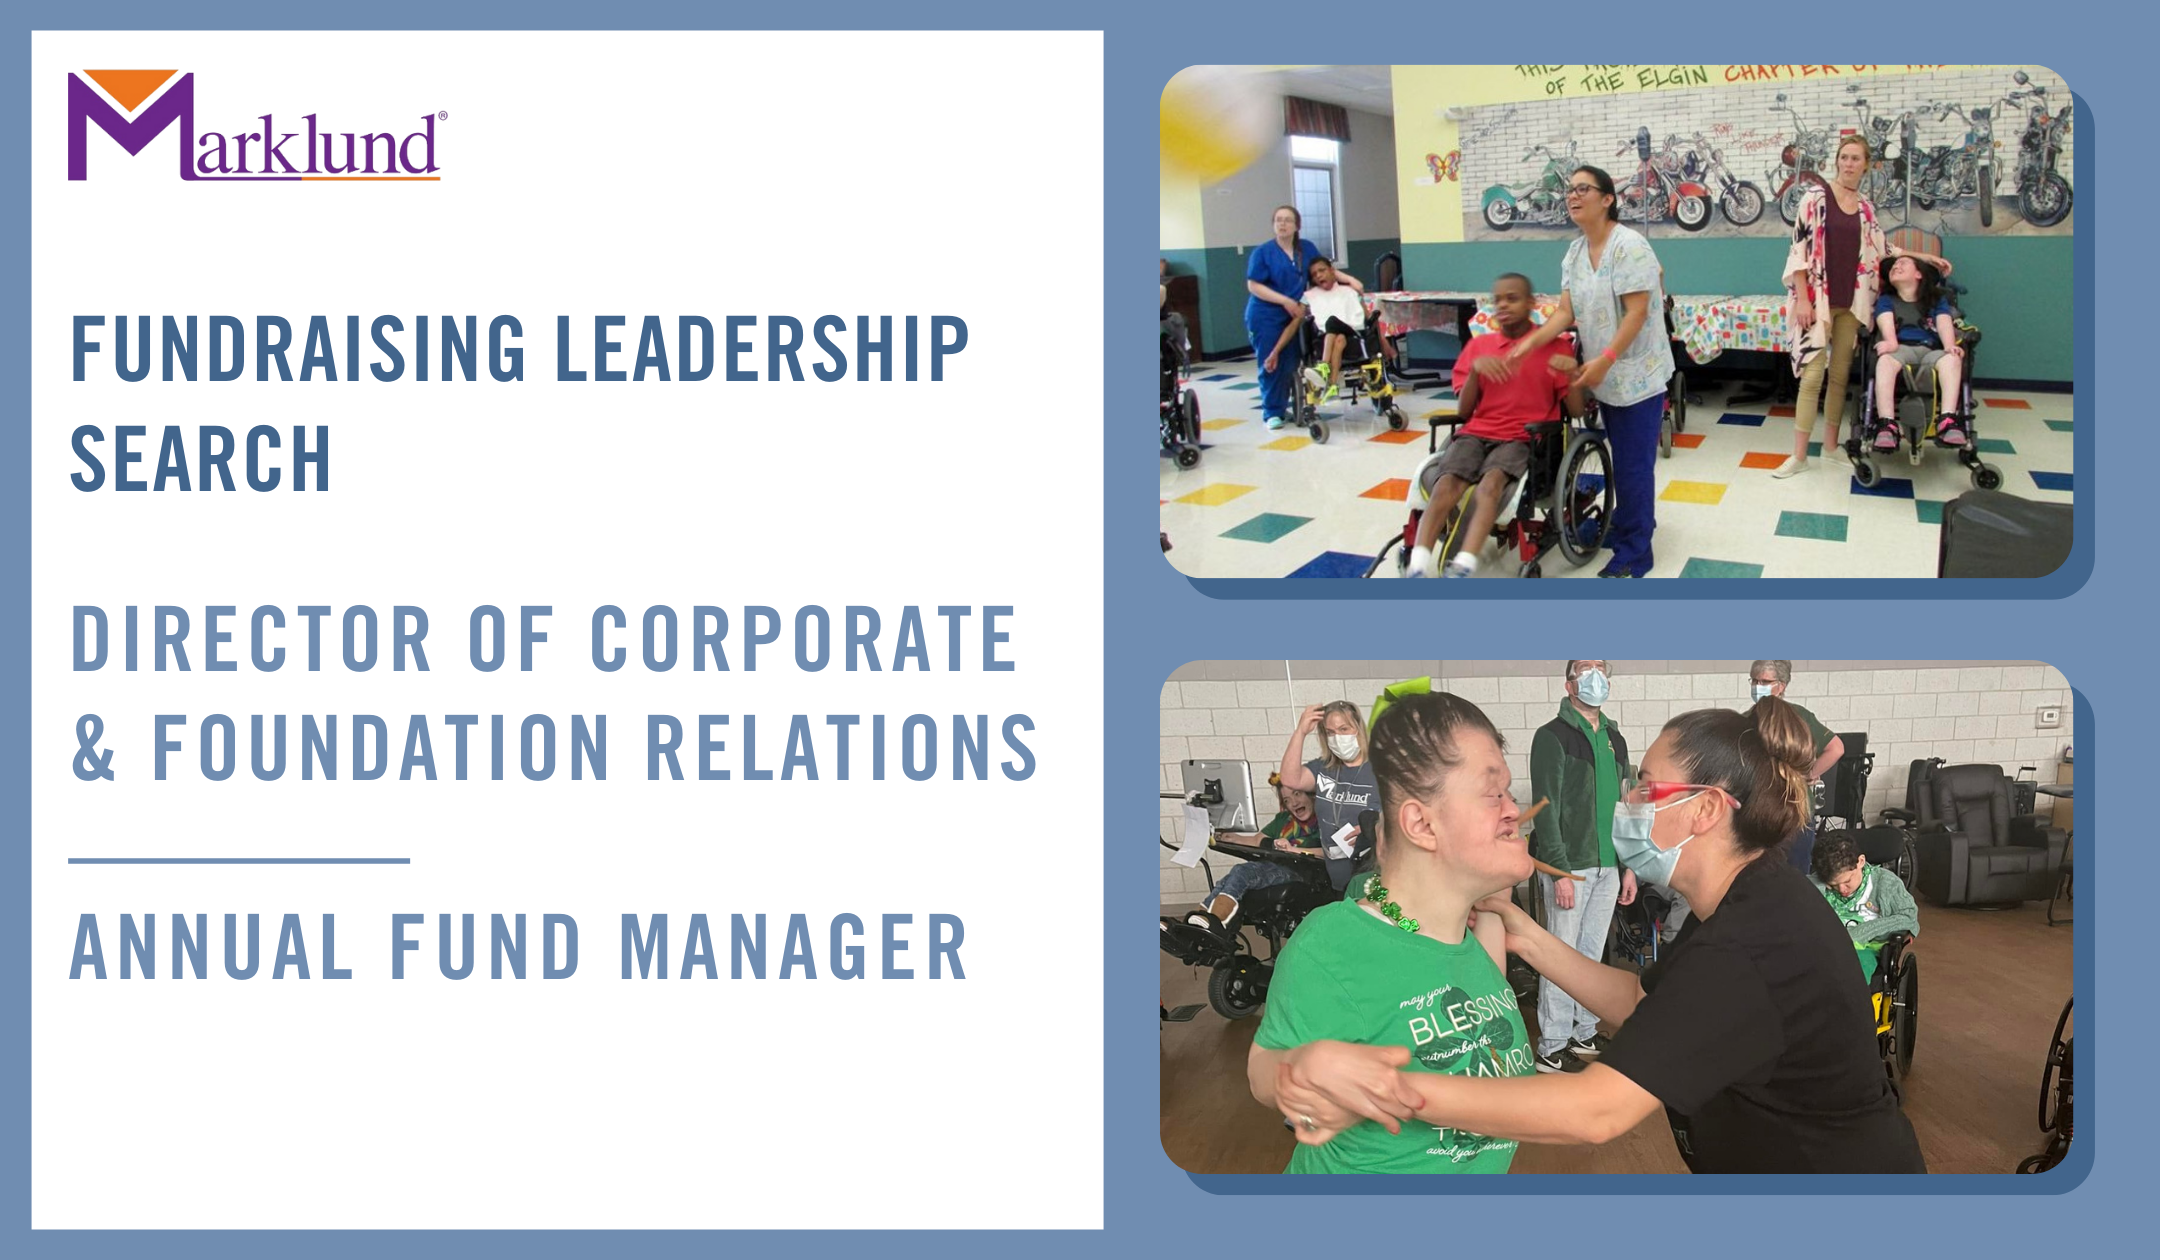 Marklund Search: Two Fundraising Leadership Roles